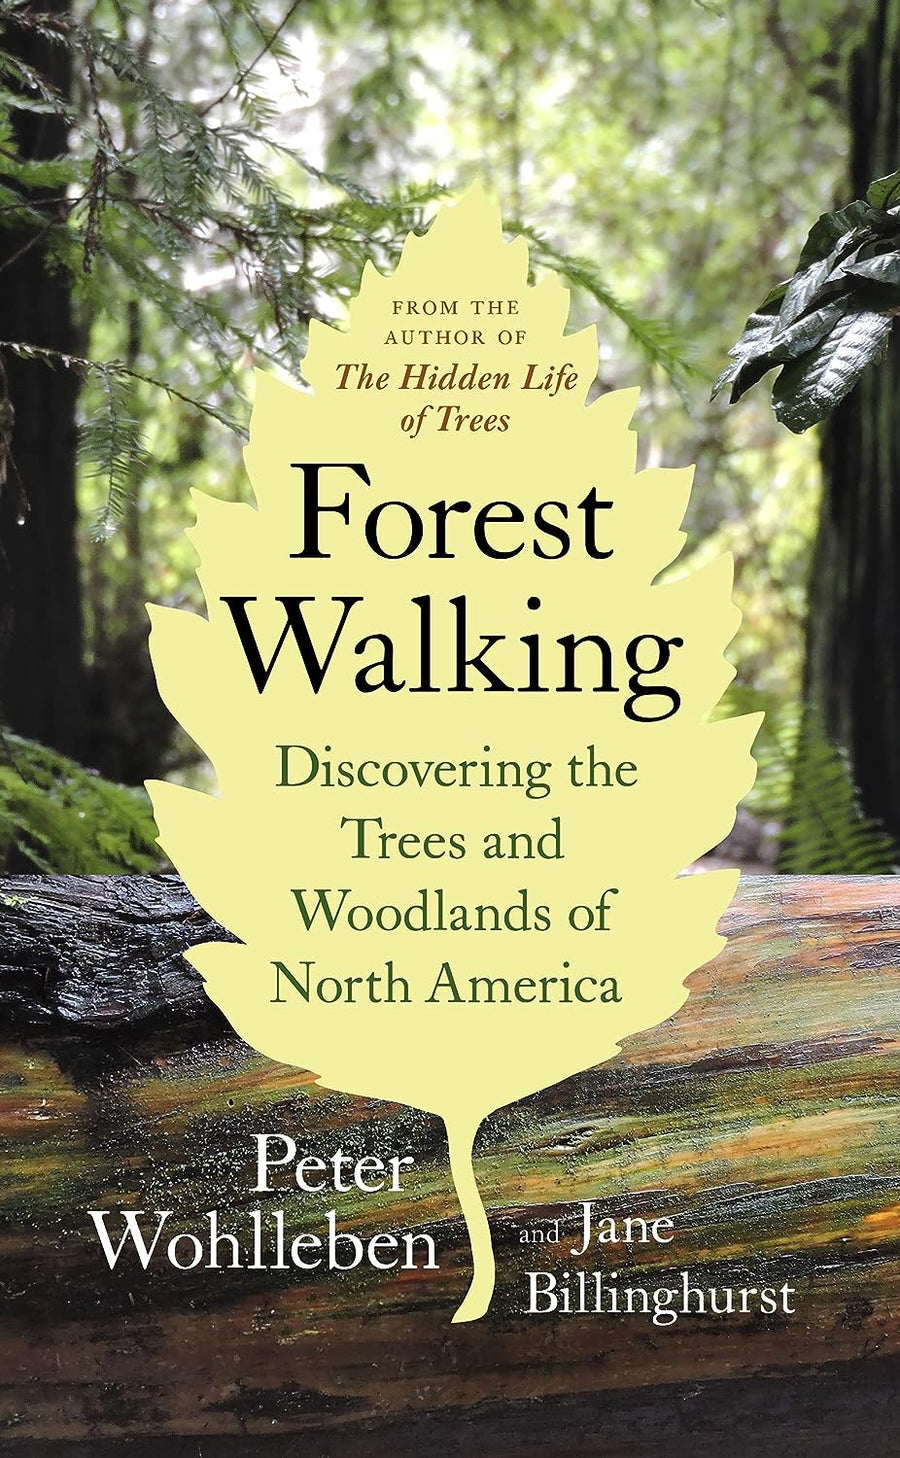 Forest Walking - Discovering the Trees and Woodlands of North America